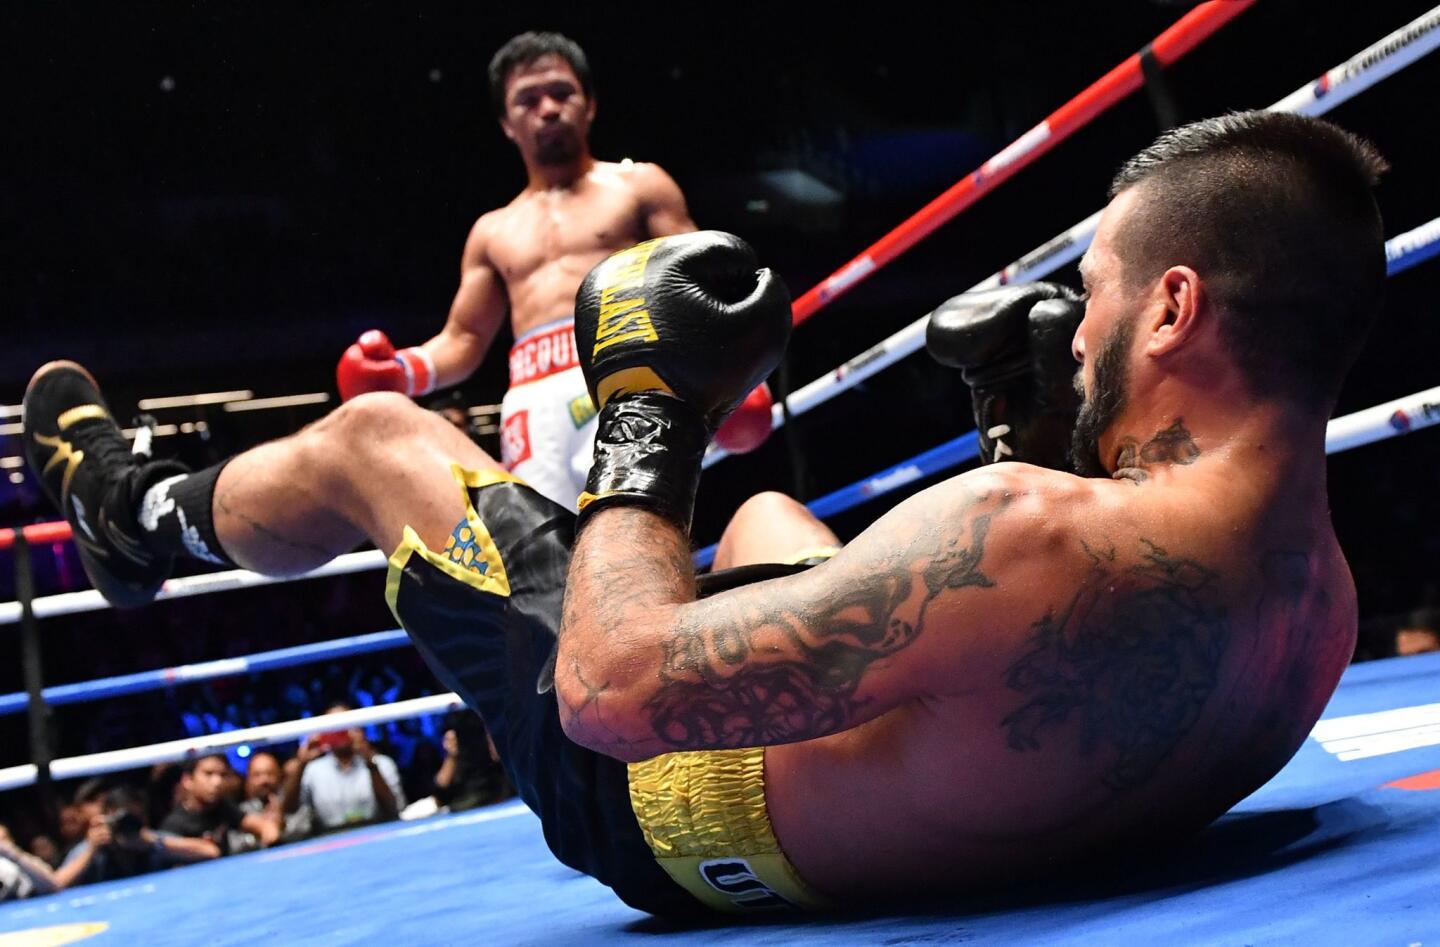 TOPSHOT - Argentina's Lucas Matthysse reacts after he was knocked down by Philippines' Manny Pacquiao during their world welterweight boxing championship bout at Axiata Arena in Kuala Lumpur on July 15, 2018. / AFP PHOTO / Mohd RASFANMOHD RASFAN/AFP/Getty Images ** OUTS - ELSENT, FPG, CM - OUTS * NM, PH, VA if sourced by CT, LA or MoD **